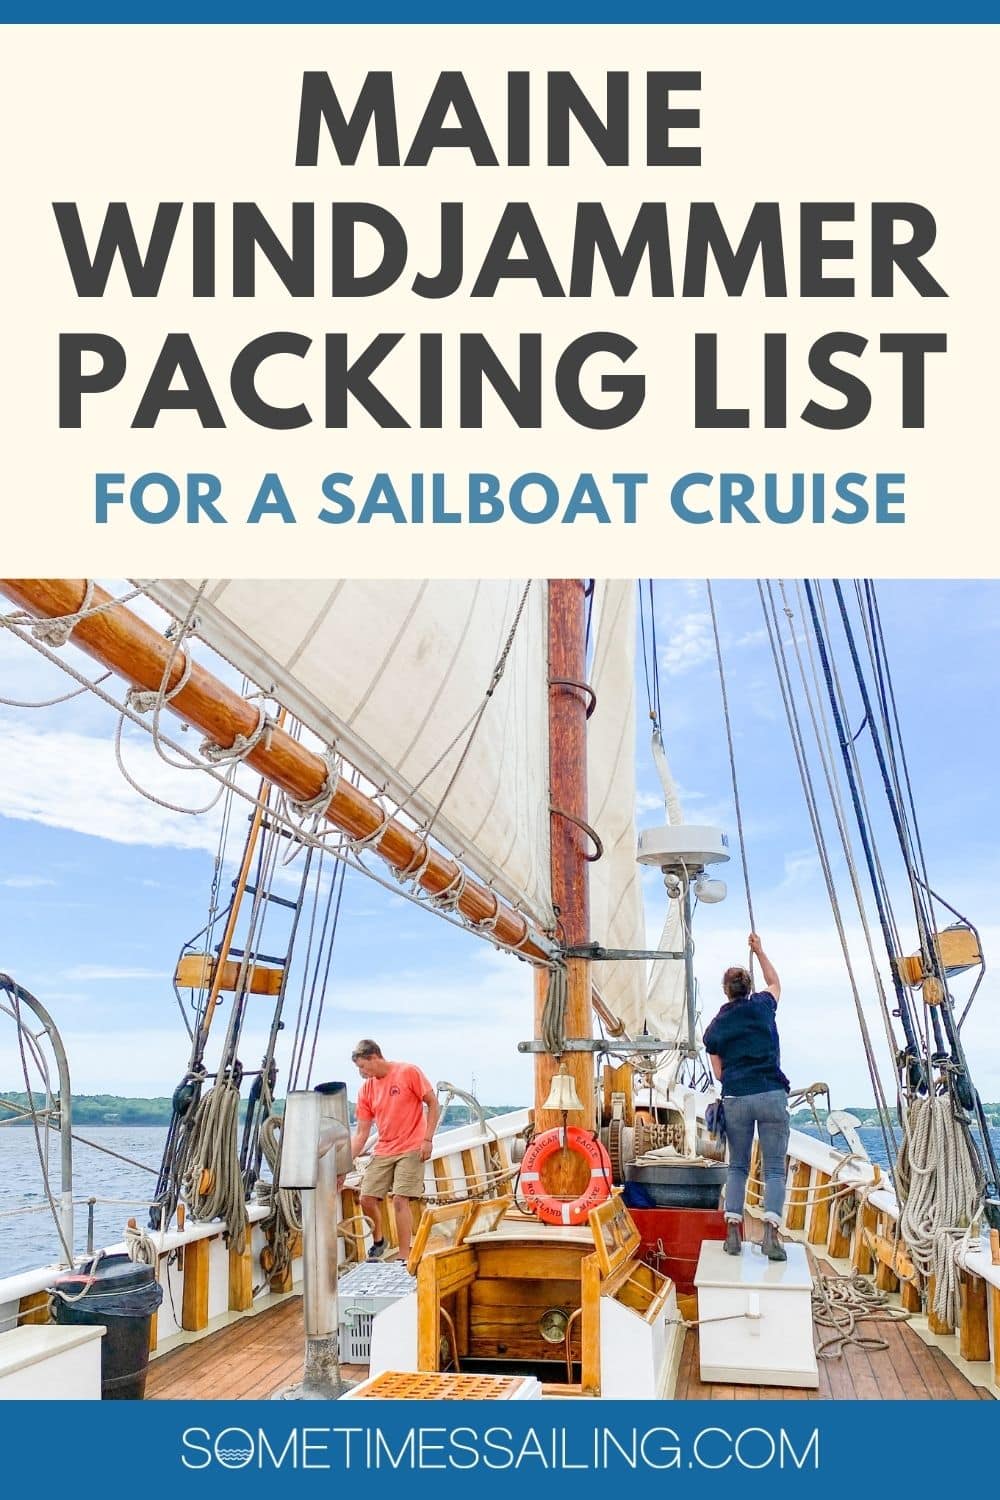 Maine Windjammer Packing List for a sailboat cruise.